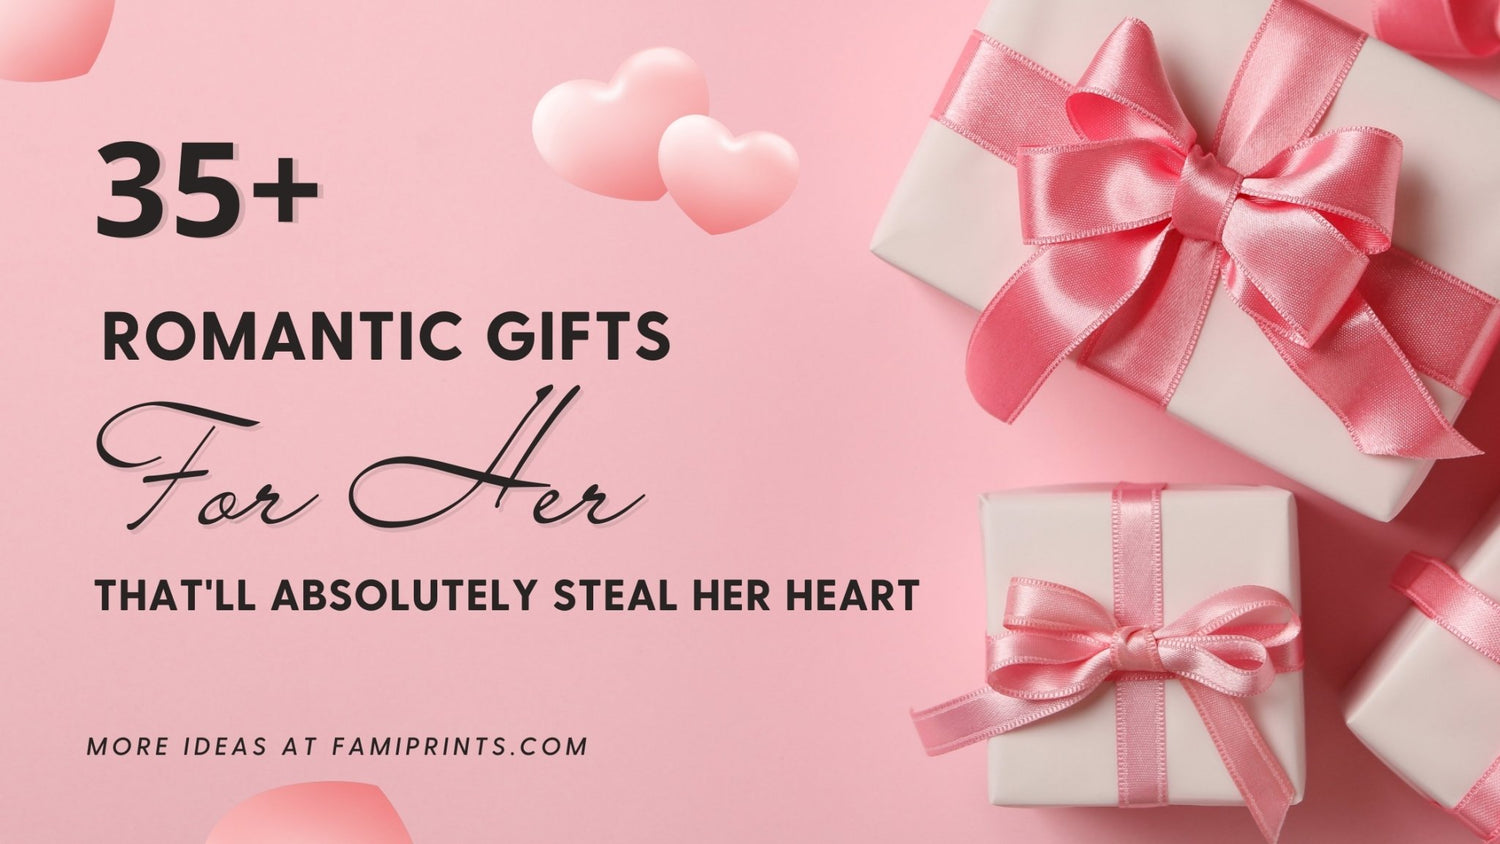 35+ Romantic Gifts For Her That'll Absolutely Steal Her Heart - FamiPrints | Trending Customizable Family Gifts